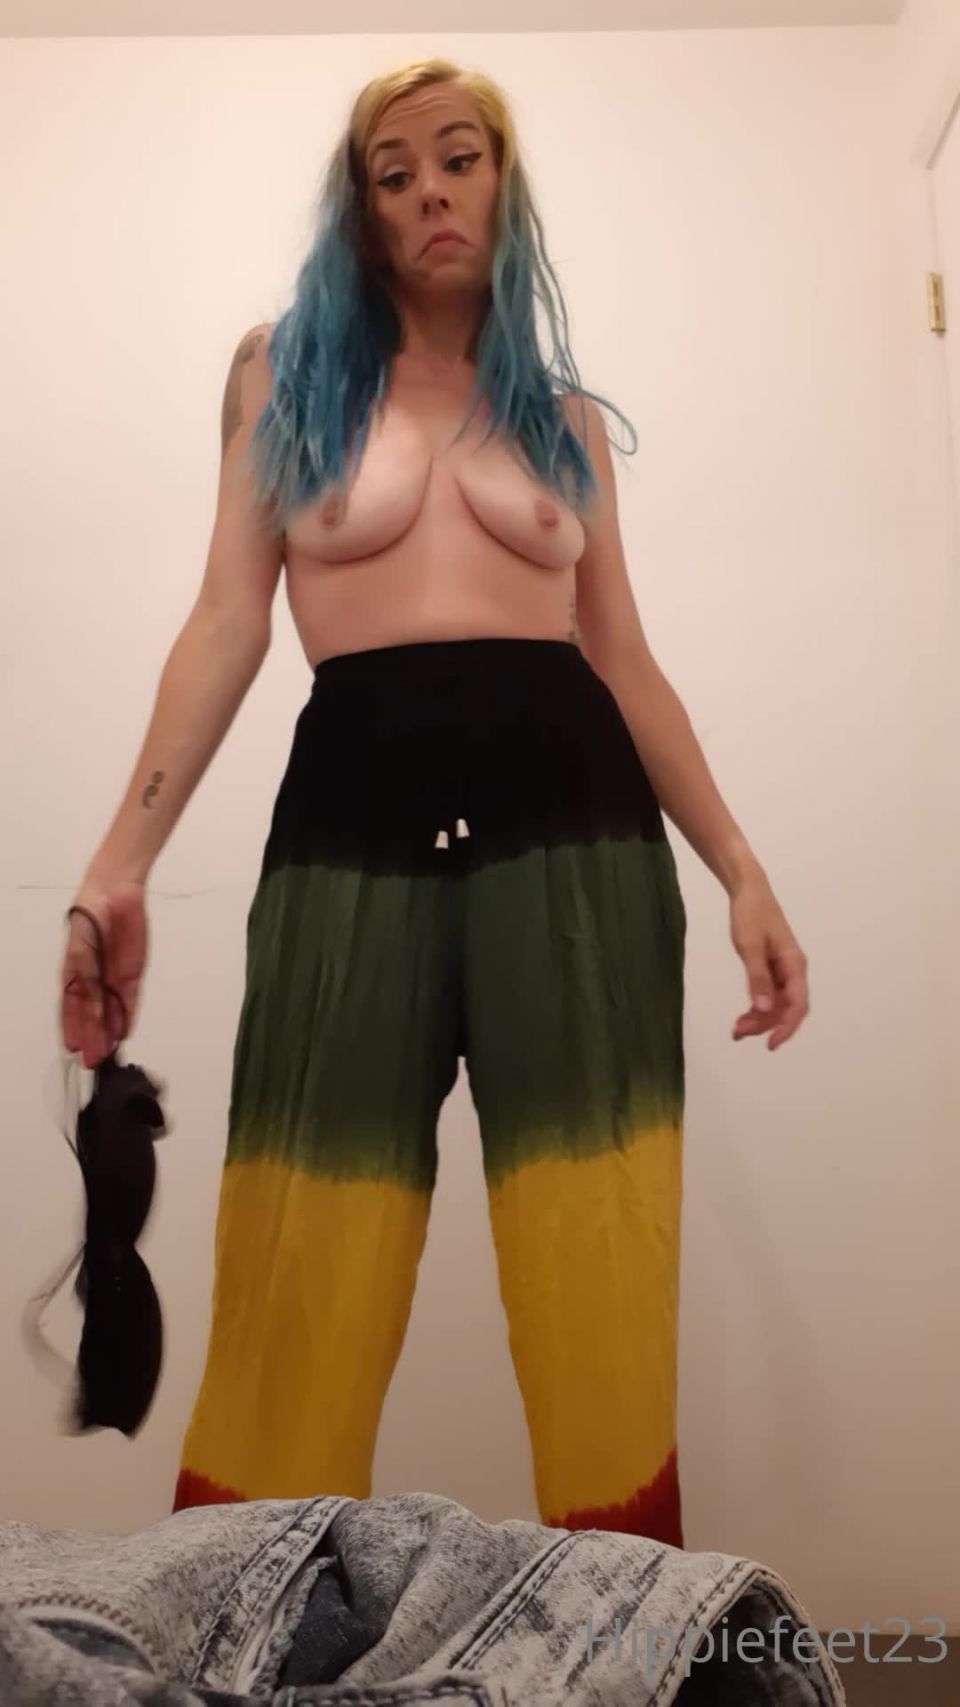 Kyra - hippiefeet23 () Hippiefeet - behind the scenes at my photoshoot yesterday what outfit are you most excited to see 22-07-2021